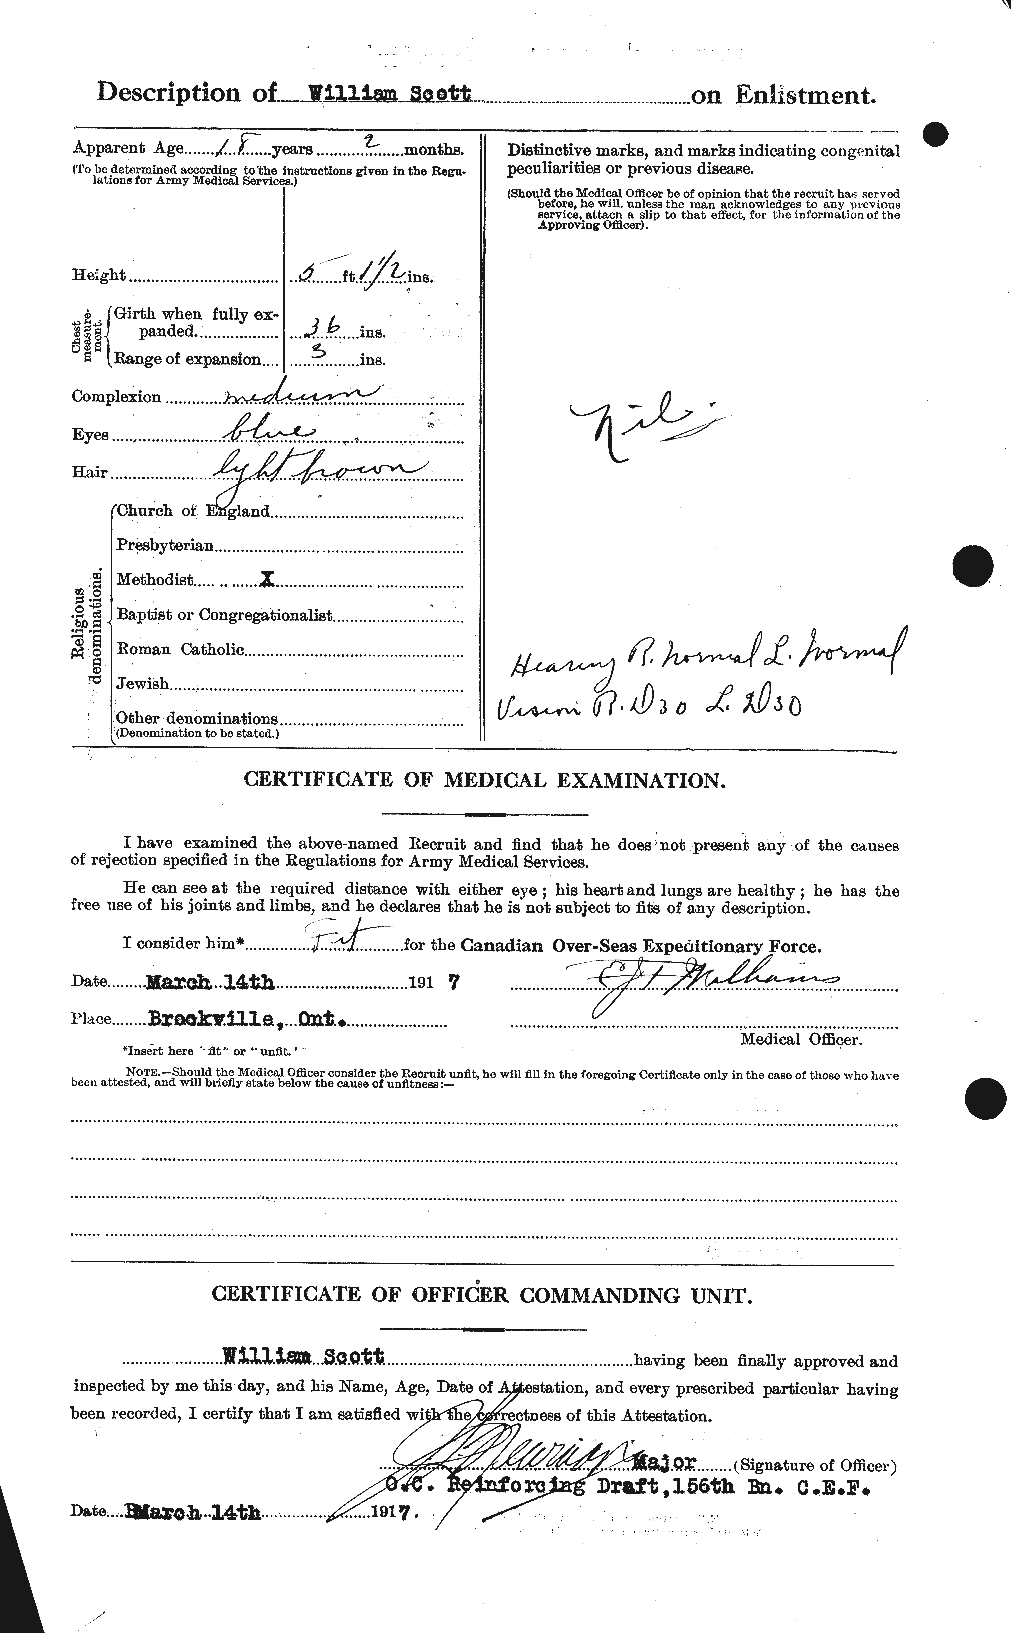 Personnel Records of the First World War - CEF 087664b